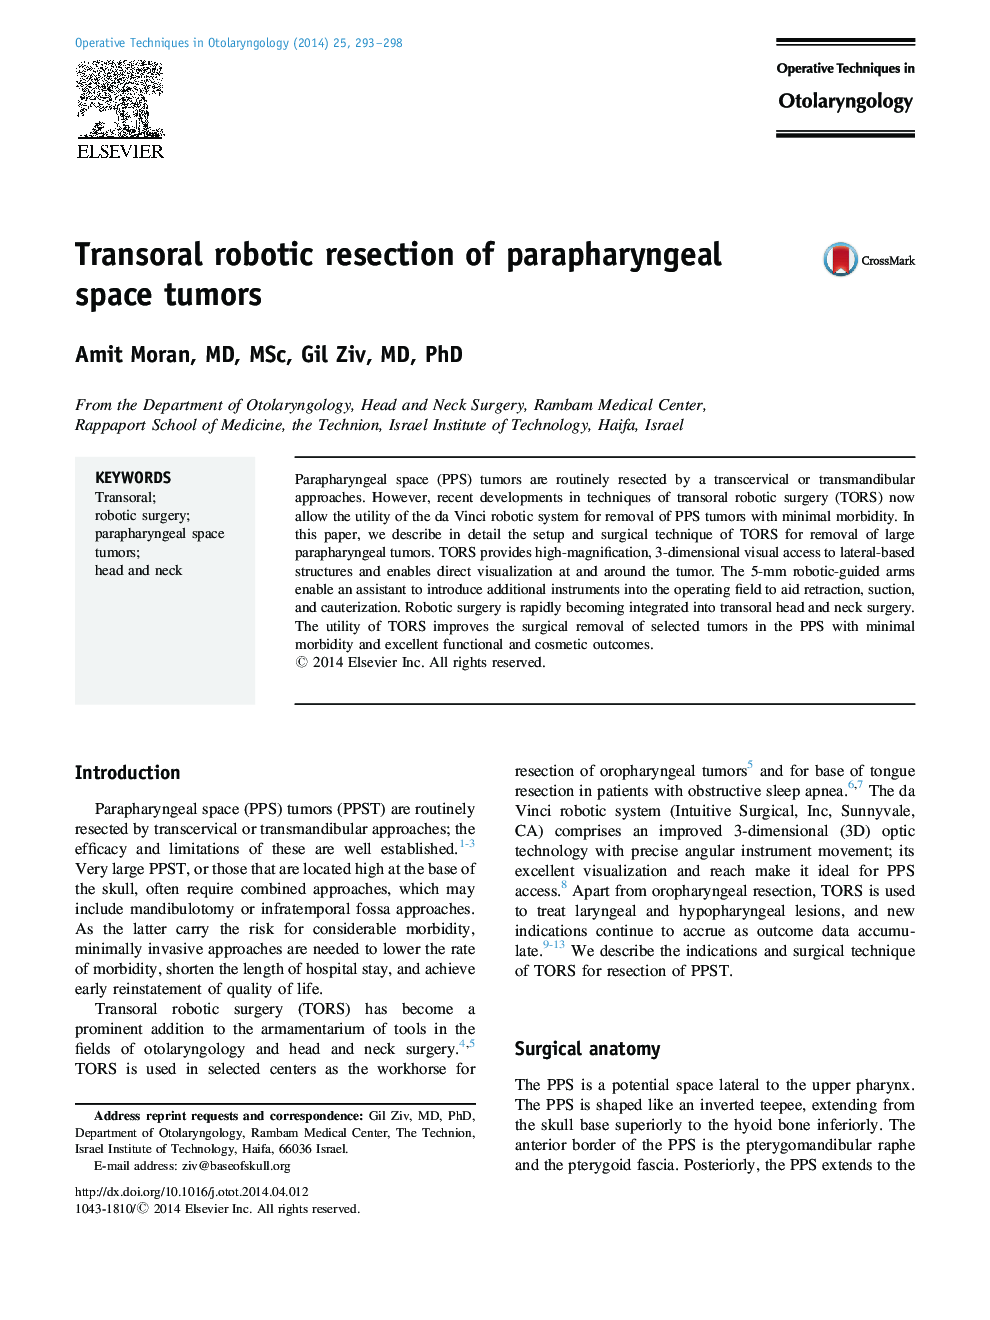 Transoral robotic resection of parapharyngeal space tumors